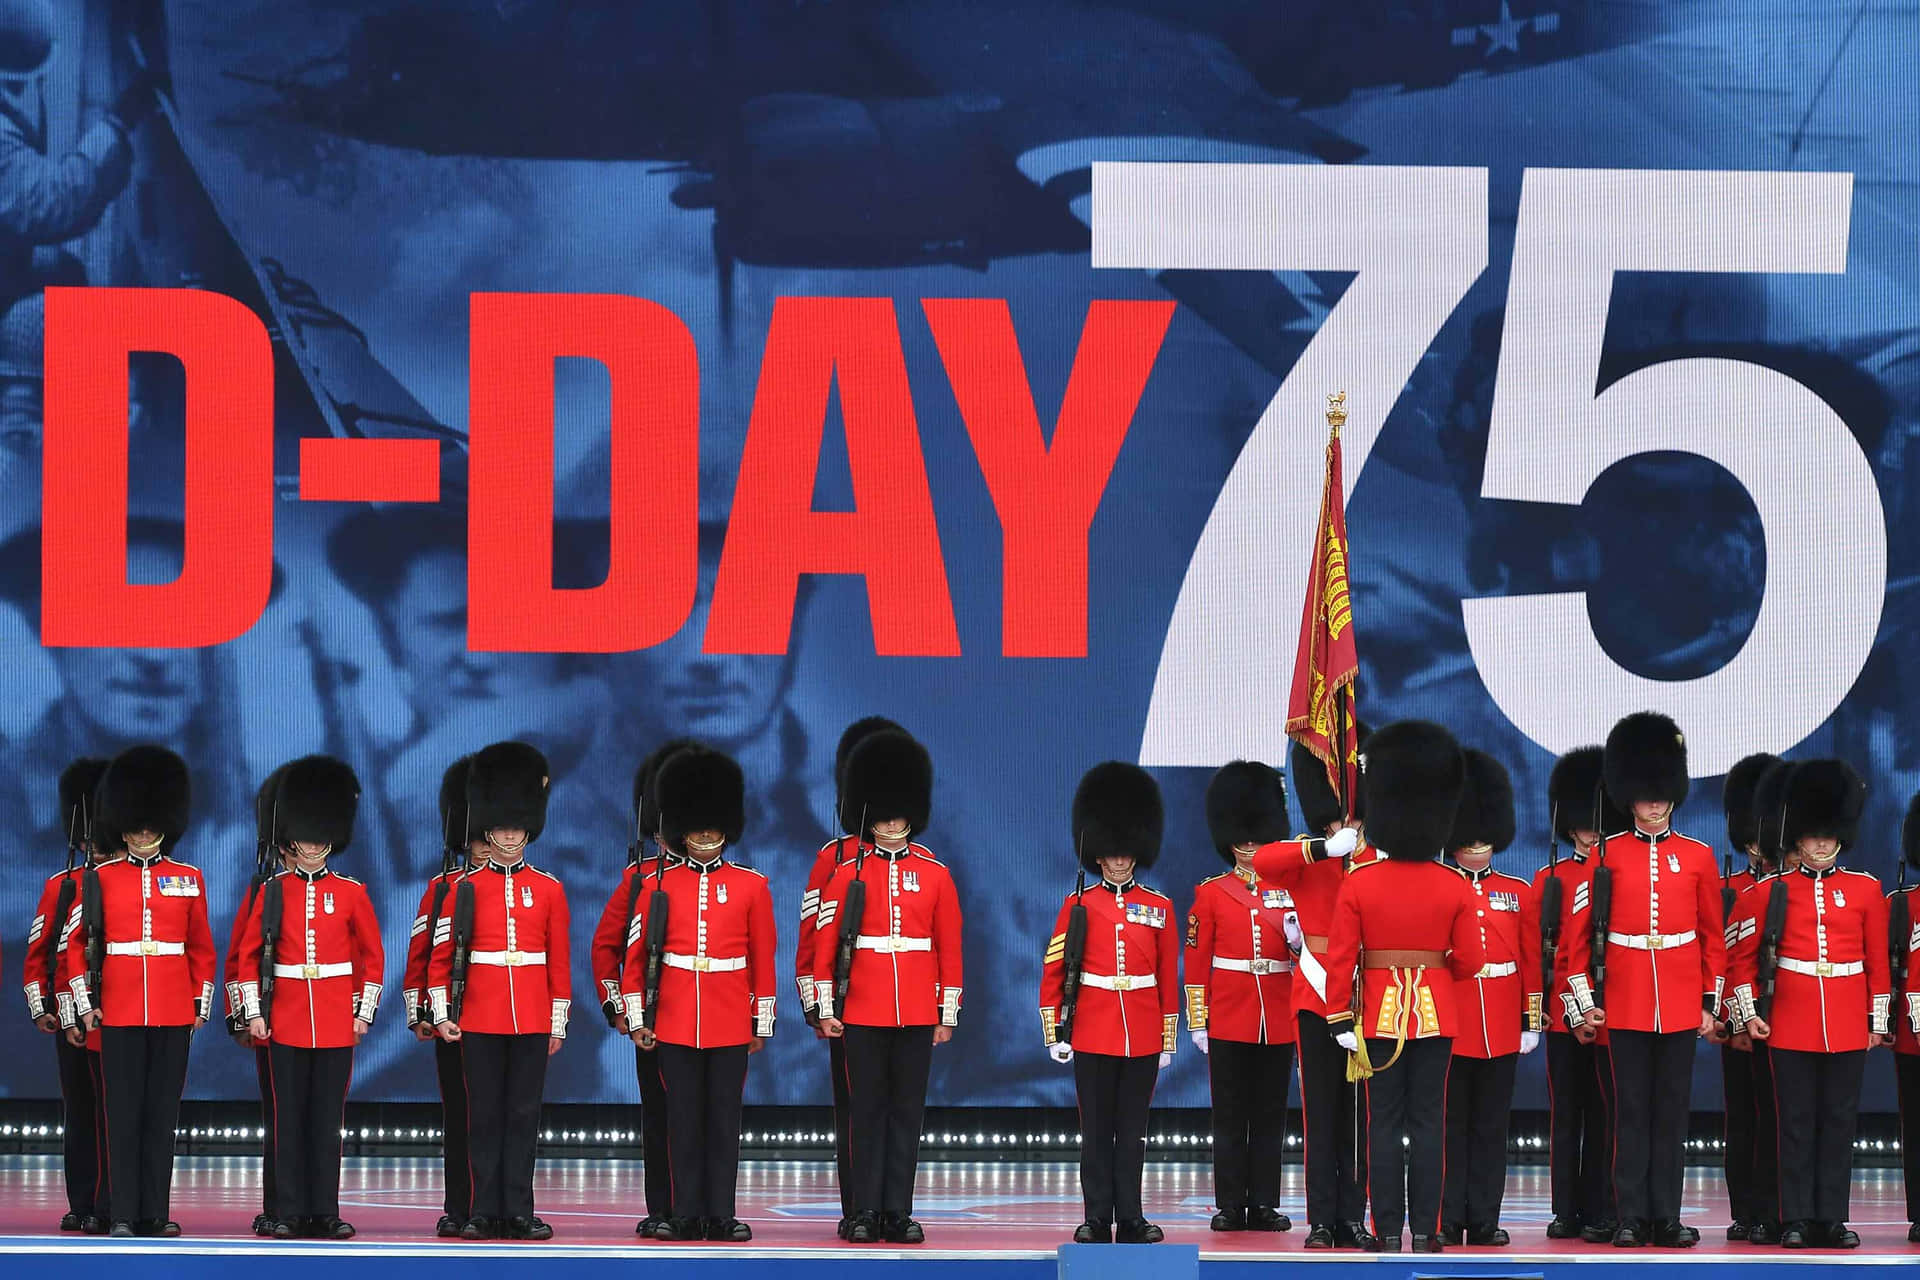 A Group Of Soldiers In Red Uniforms Standing In Front Of A Large Sign